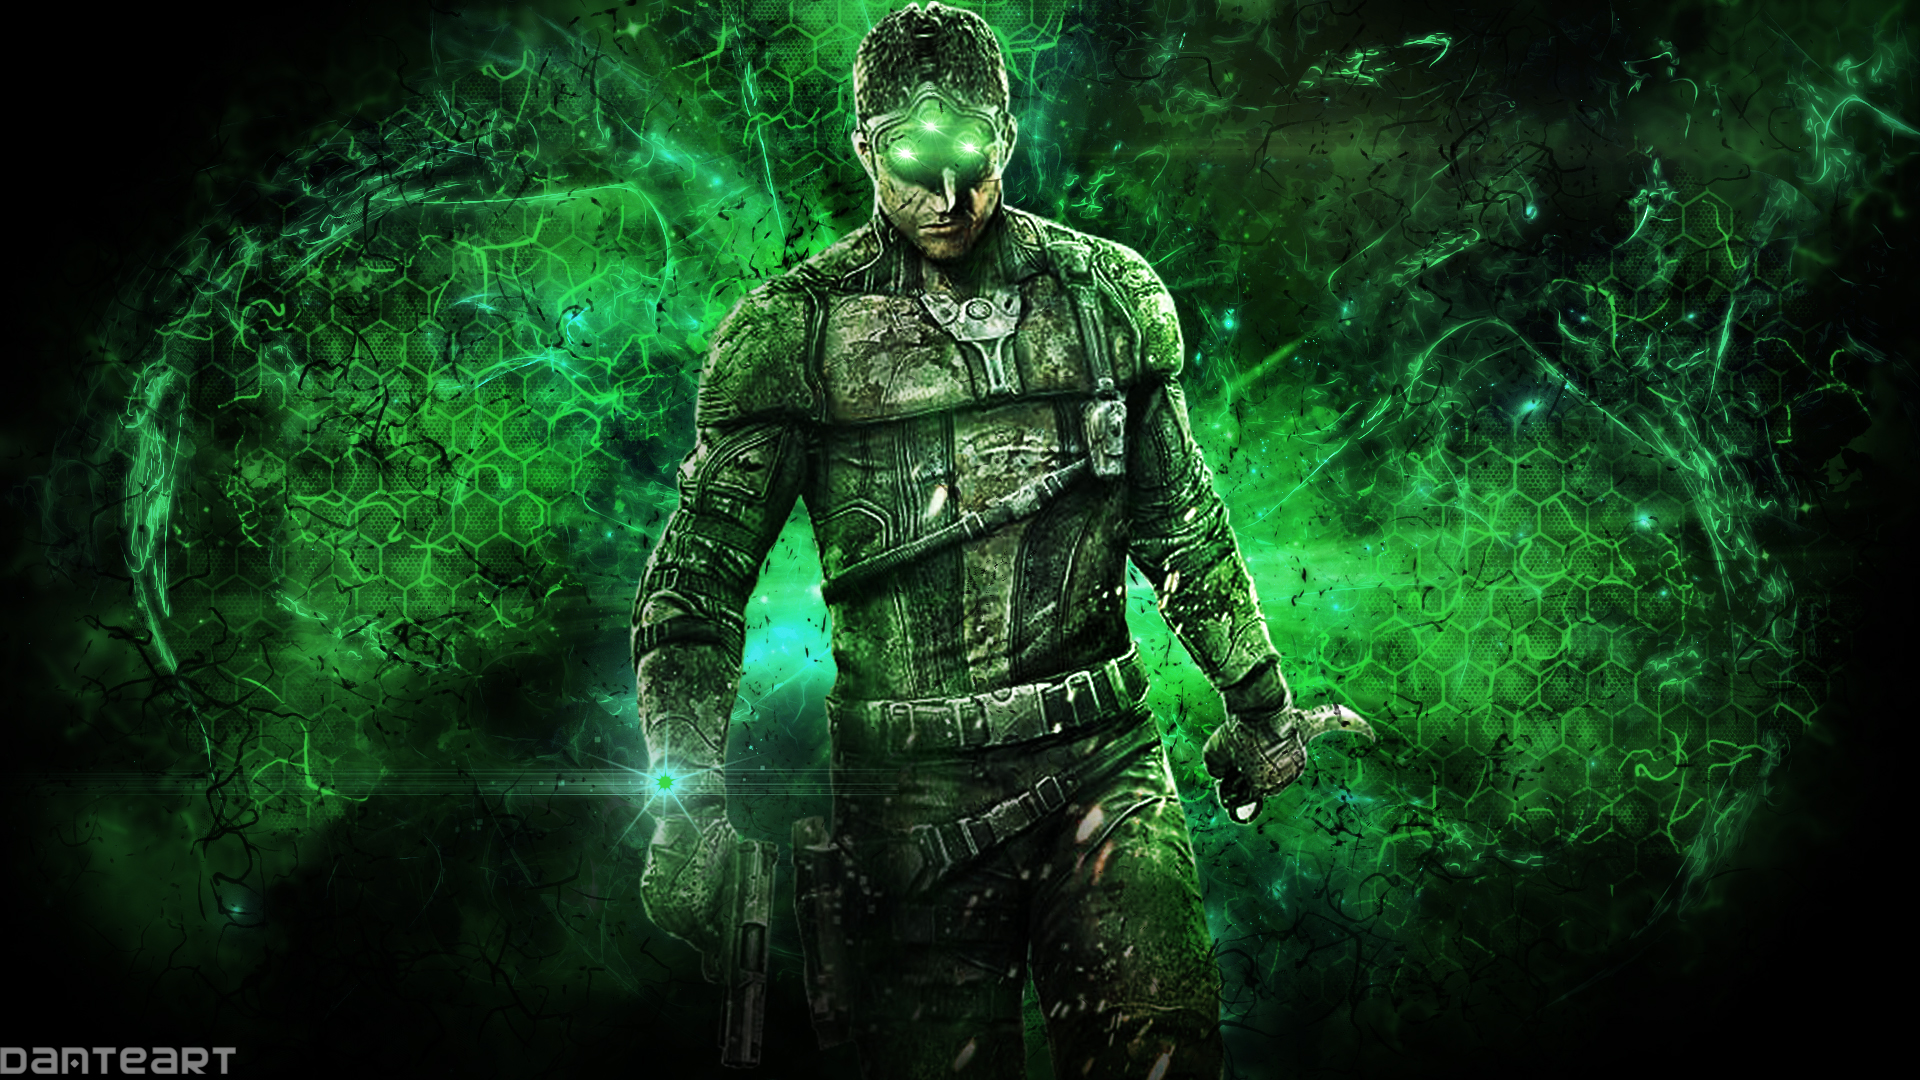 download splinter cell 2010 for free